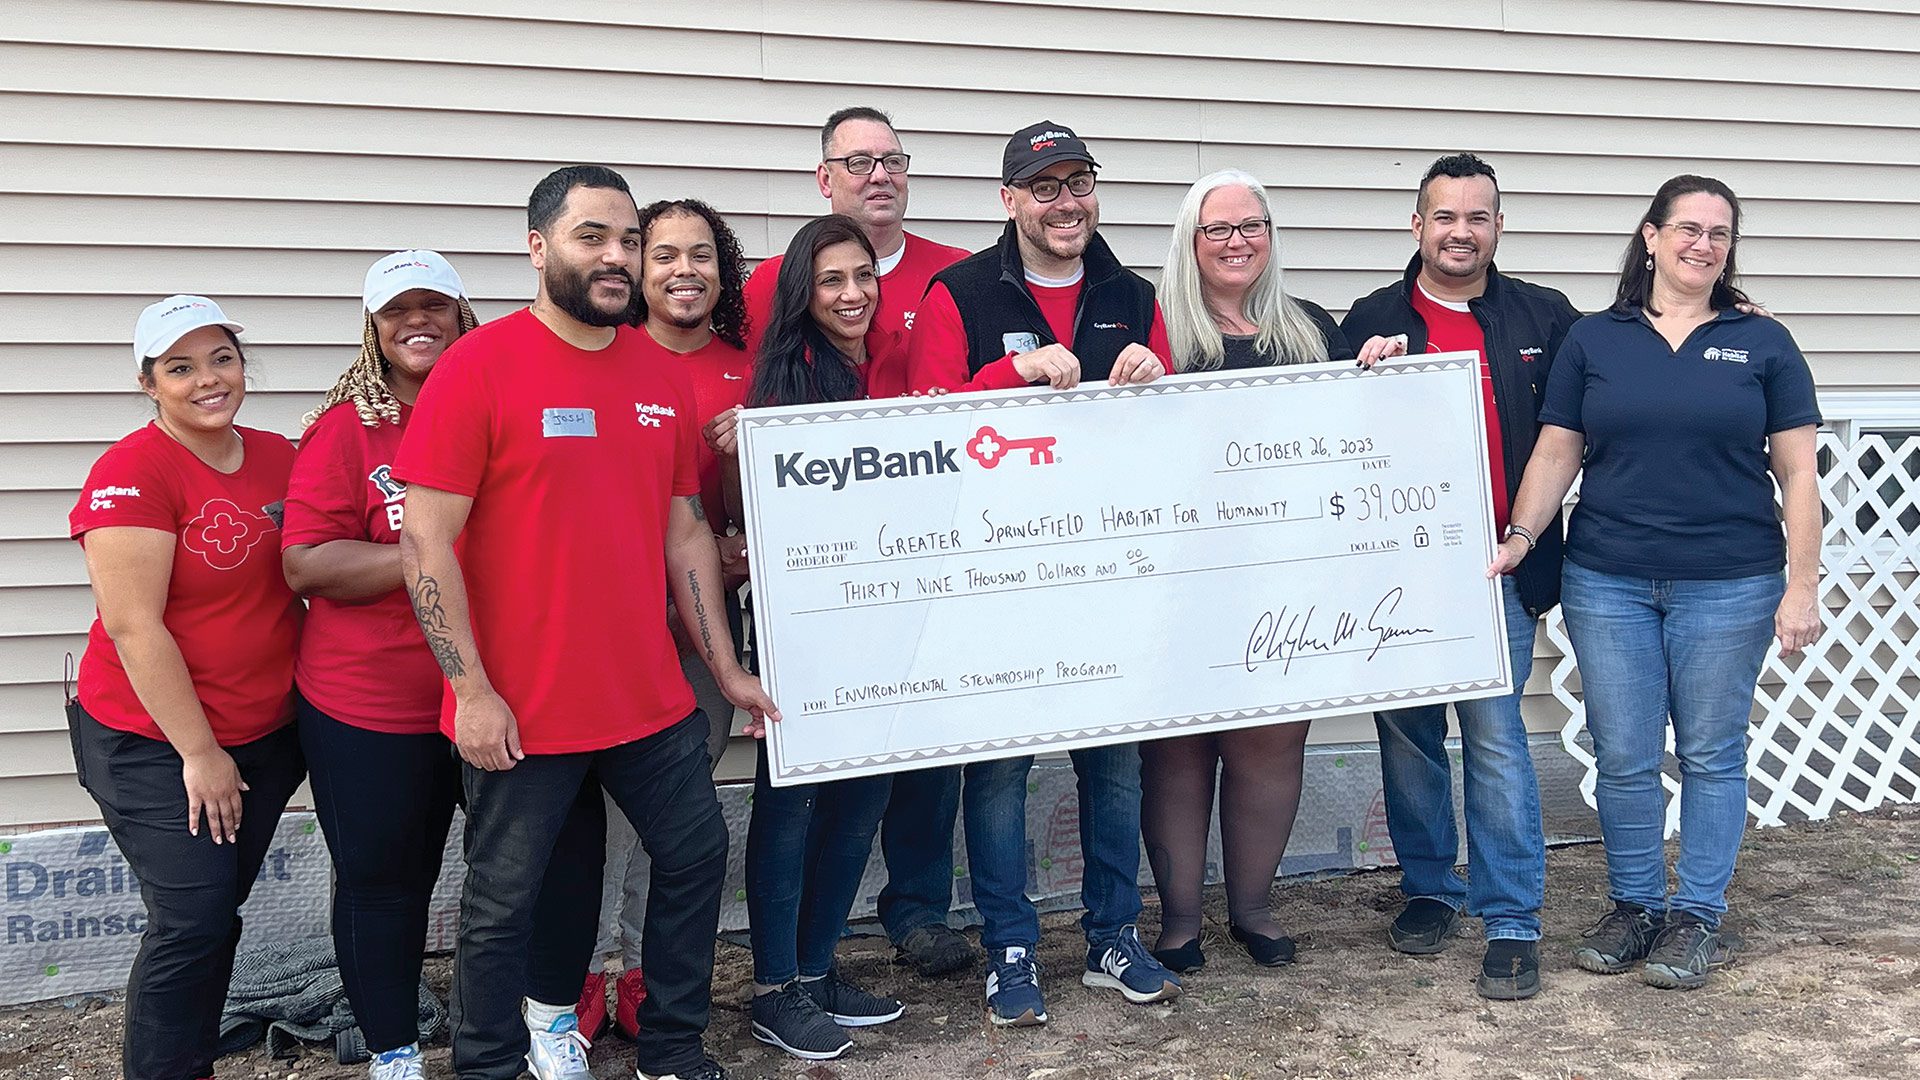 Pictured above, from left: KeyBank employees Janis Deynes, Sharia Coley, Josh Flores, Norbert Grant III, Priya Tater, Tom Morace, Jeff Guyott,  Kendle Taylor, and Tito Ramon with Habitat for Humanity Executive Director Aimee Giroux.